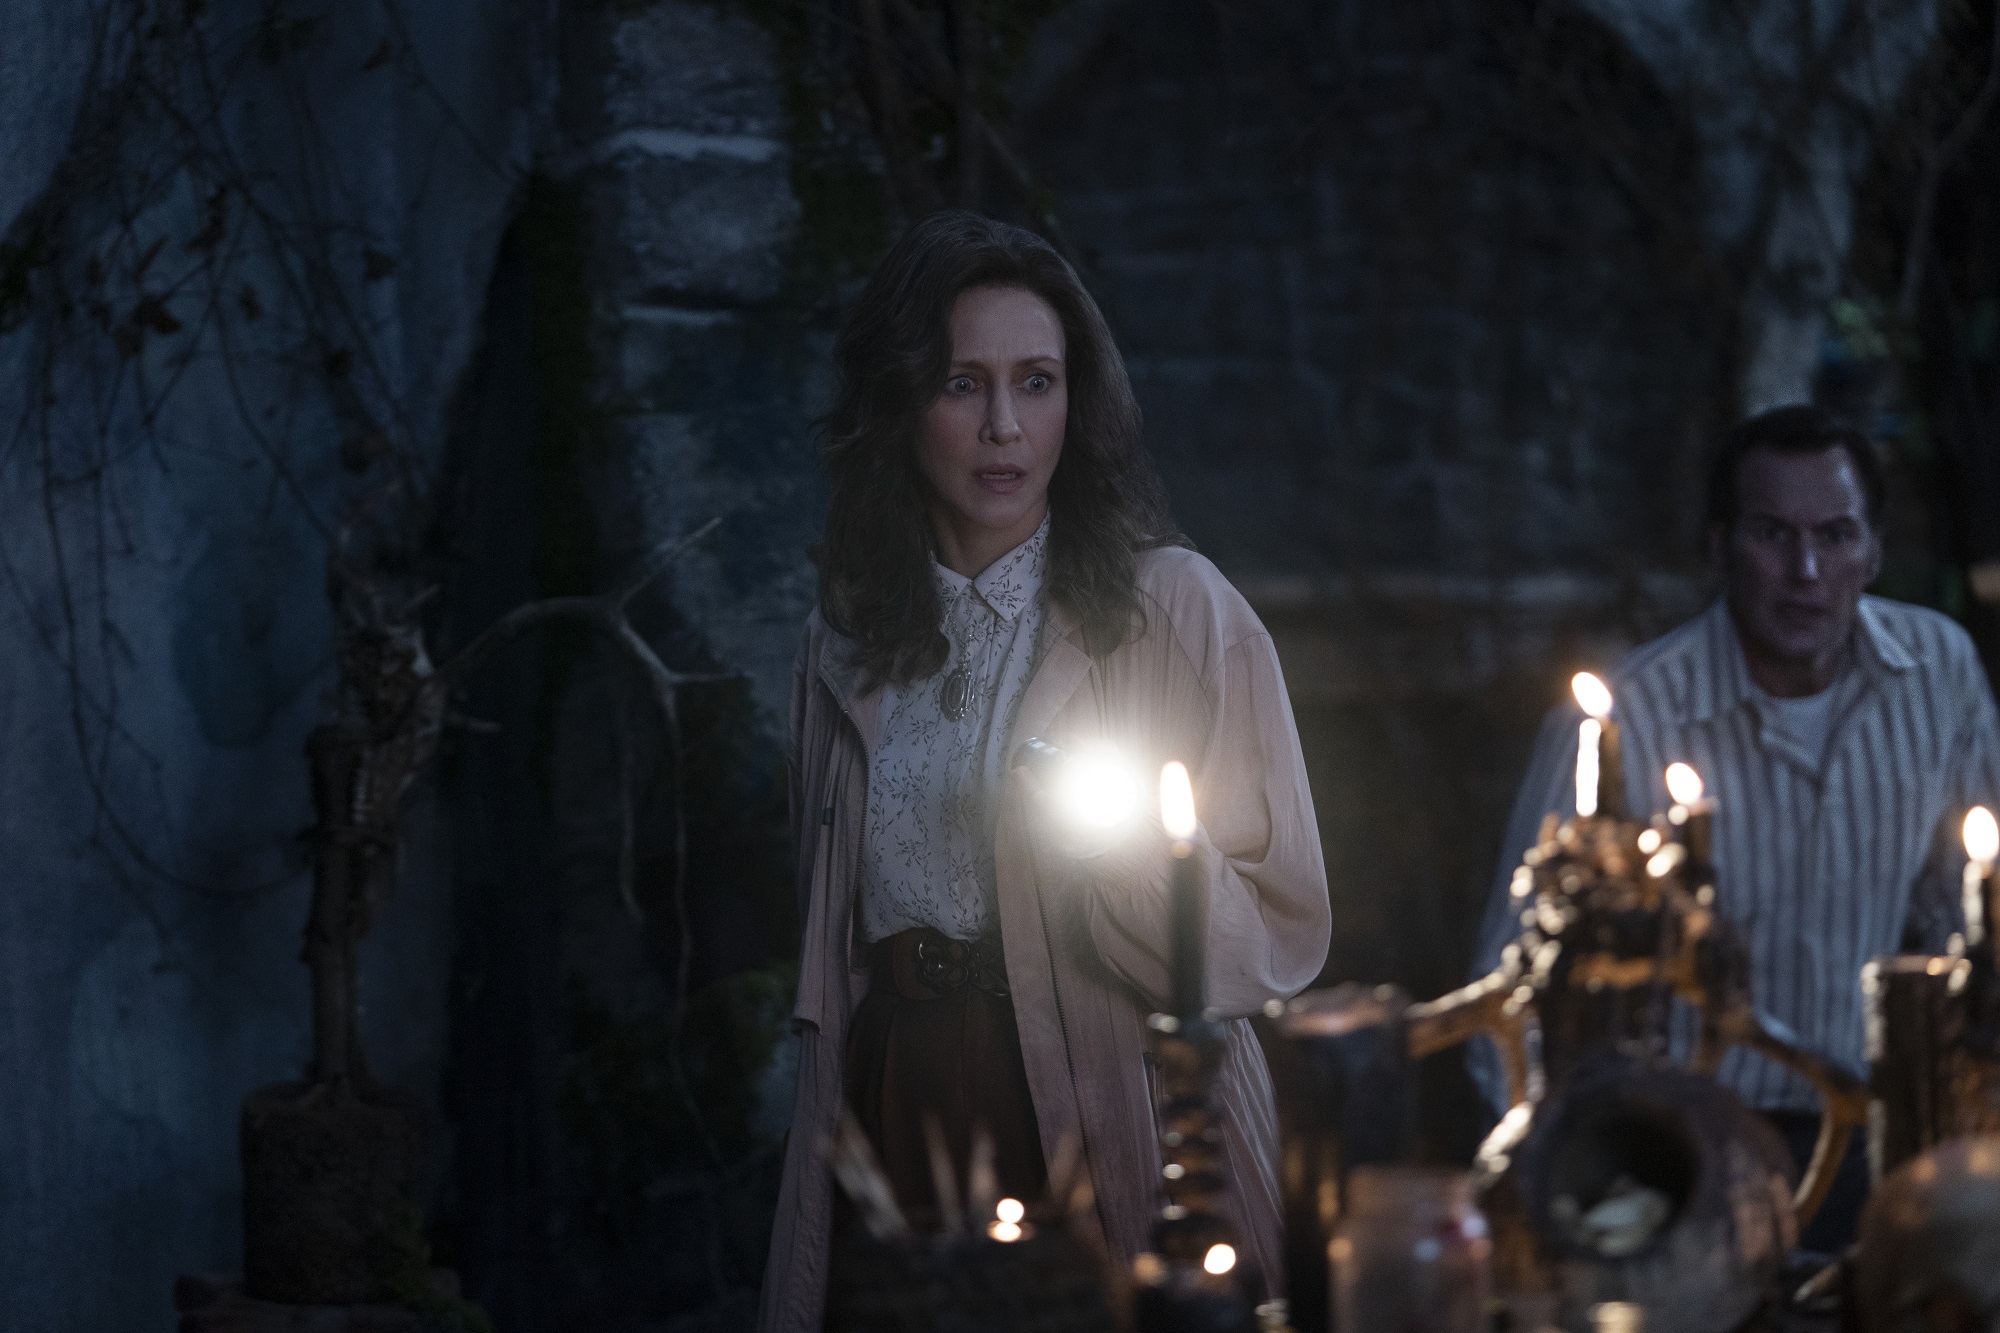 The Conjuring: The Devil Made Me Do It: Vera Farmiga and Patrick Wilson investigate occult artifacts